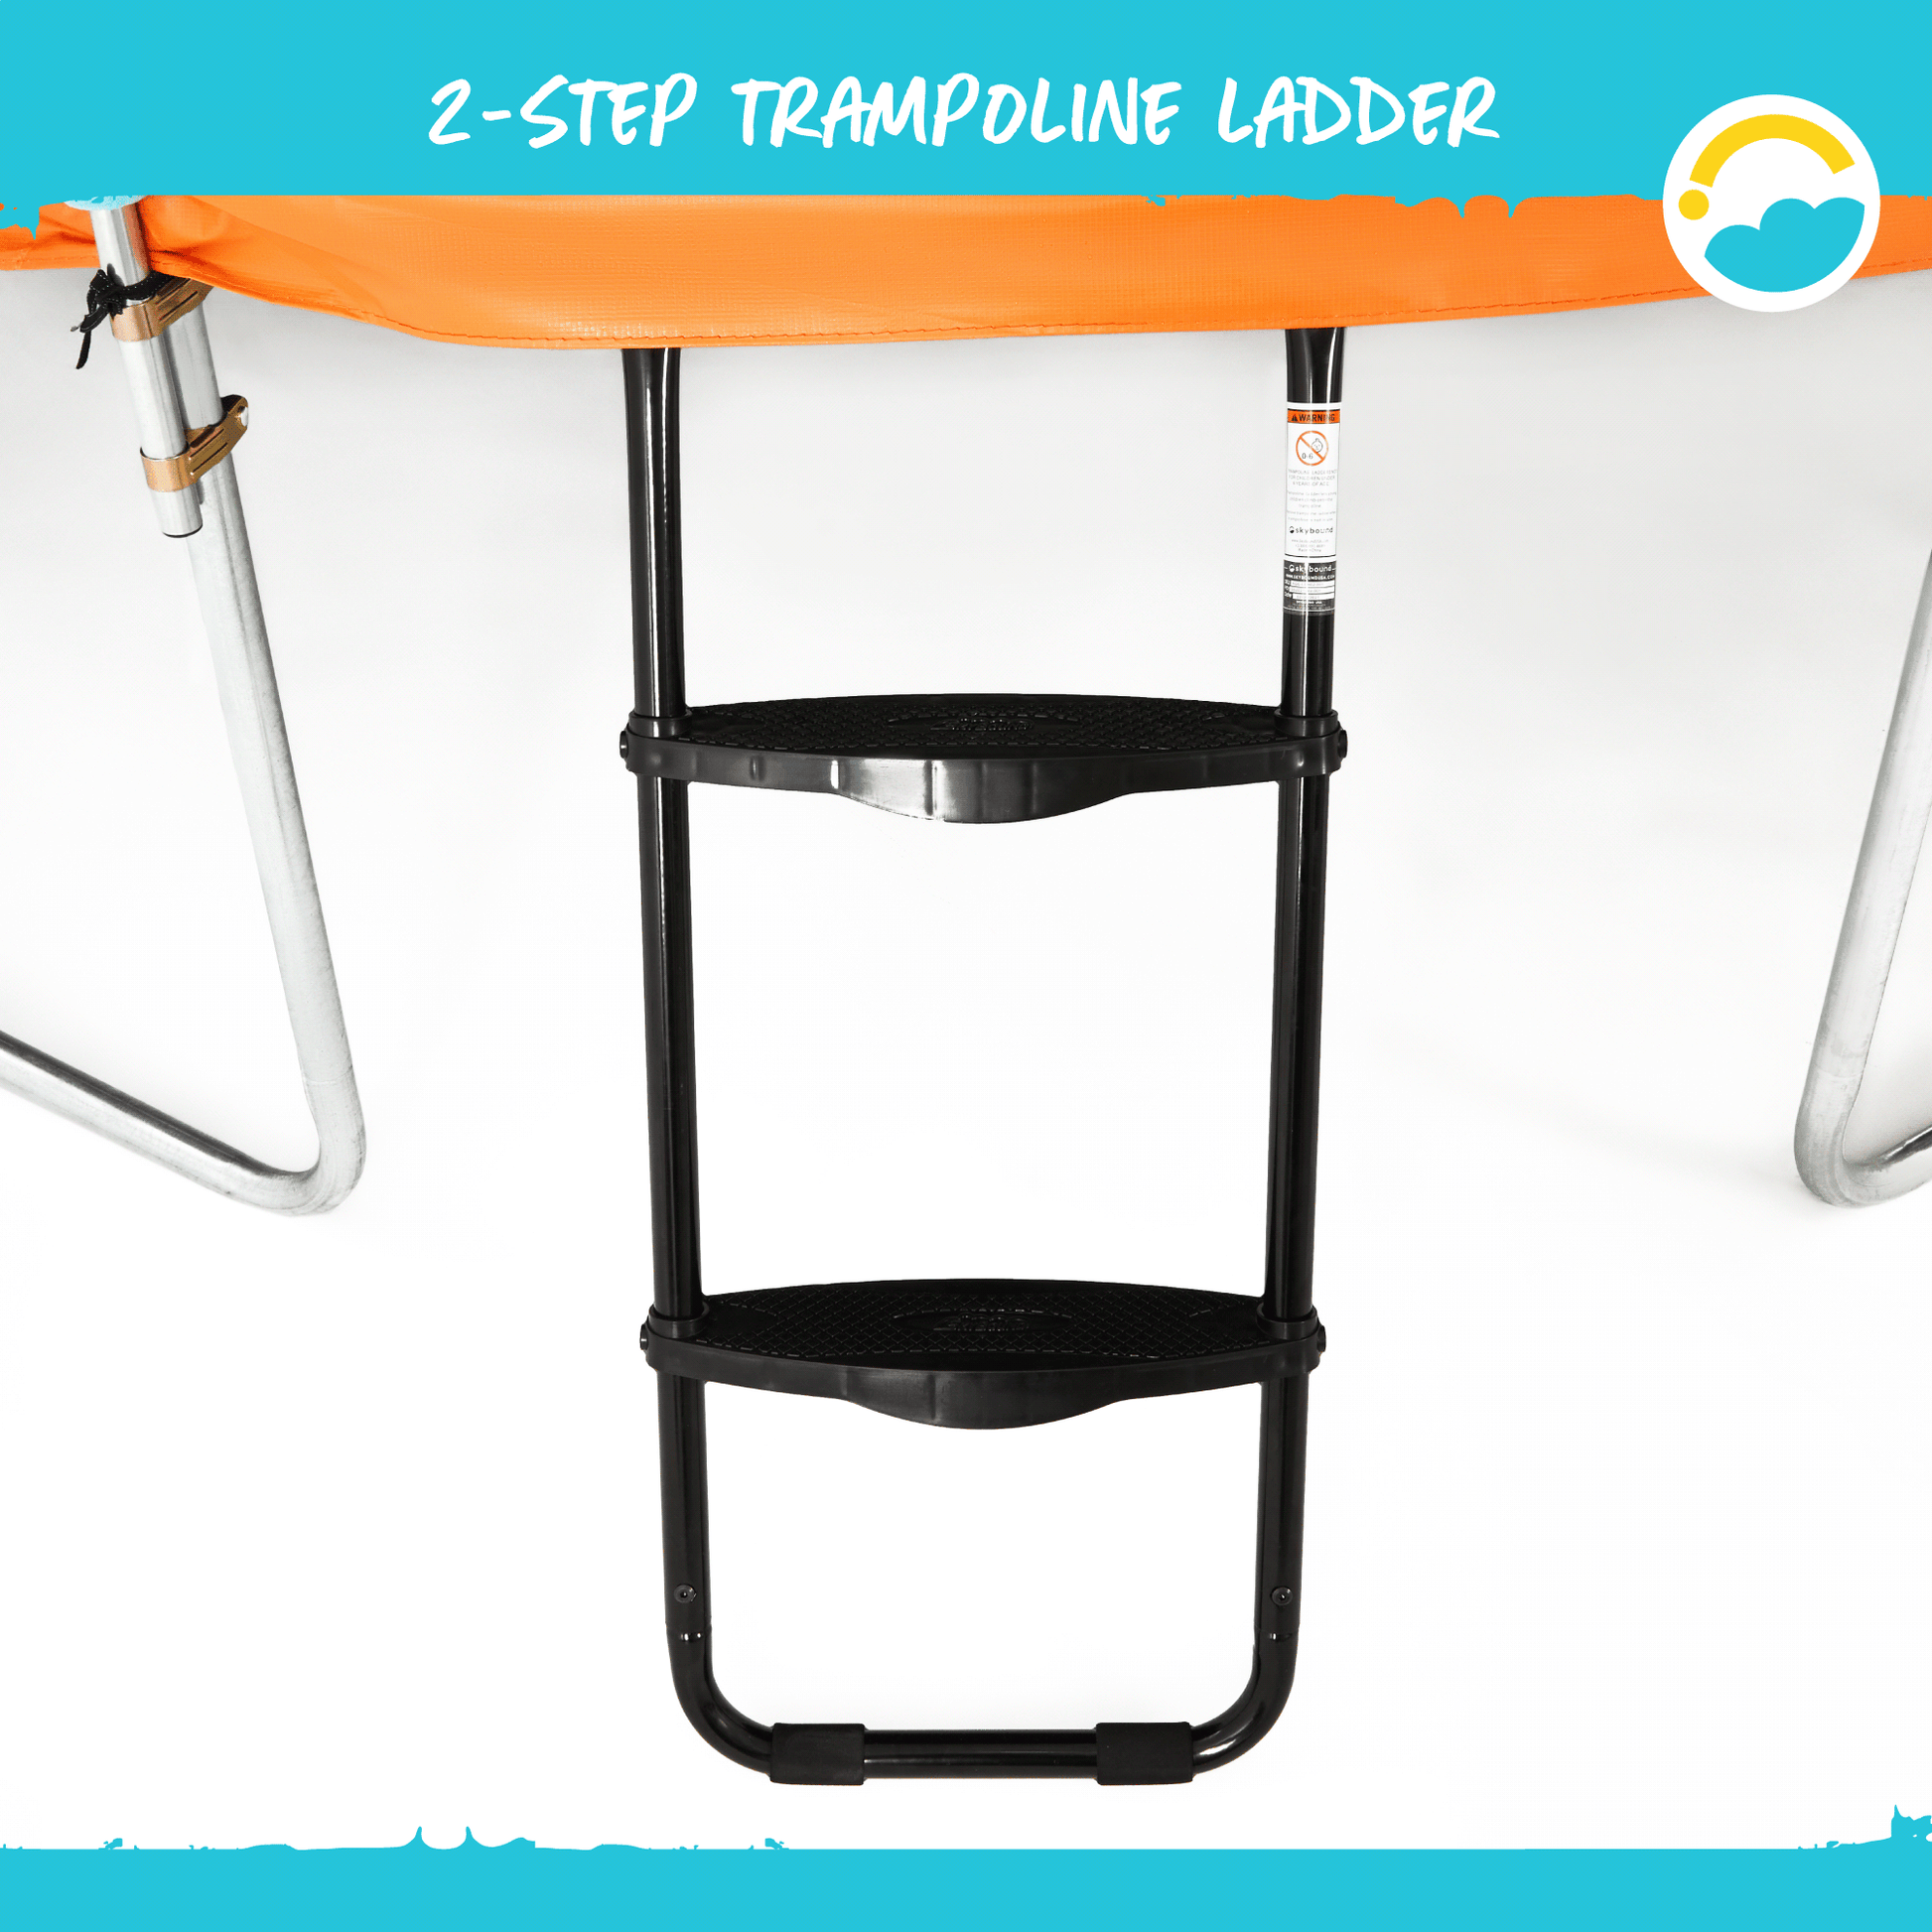 2-Step Trampoline Ladder.  Image on how it will look like attached to the Trampoline.  